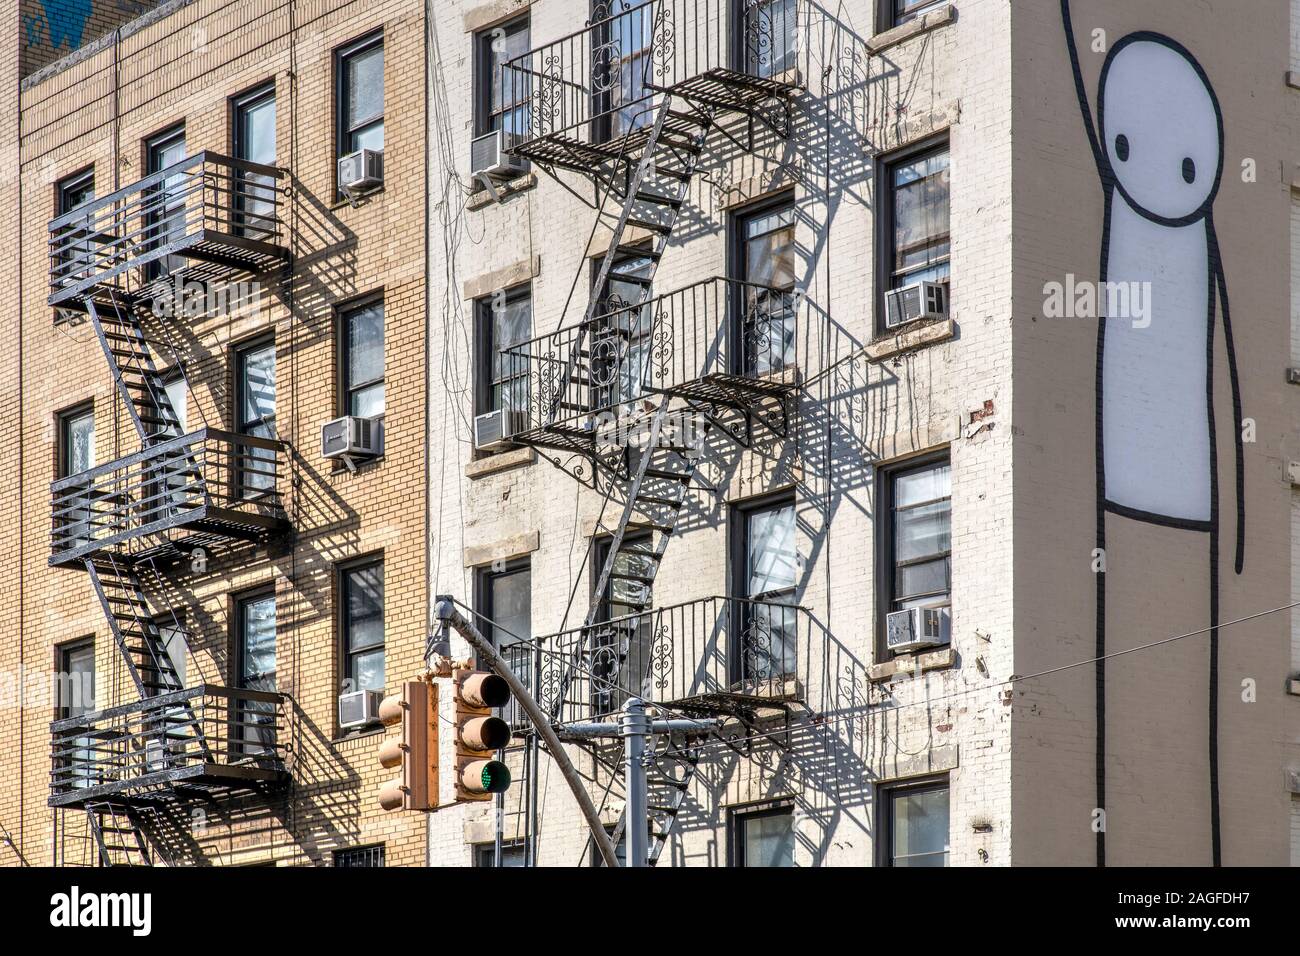 Old building with metal fire escape stairs ladders, East Village, Manhattan, New York, USA Stock Photo